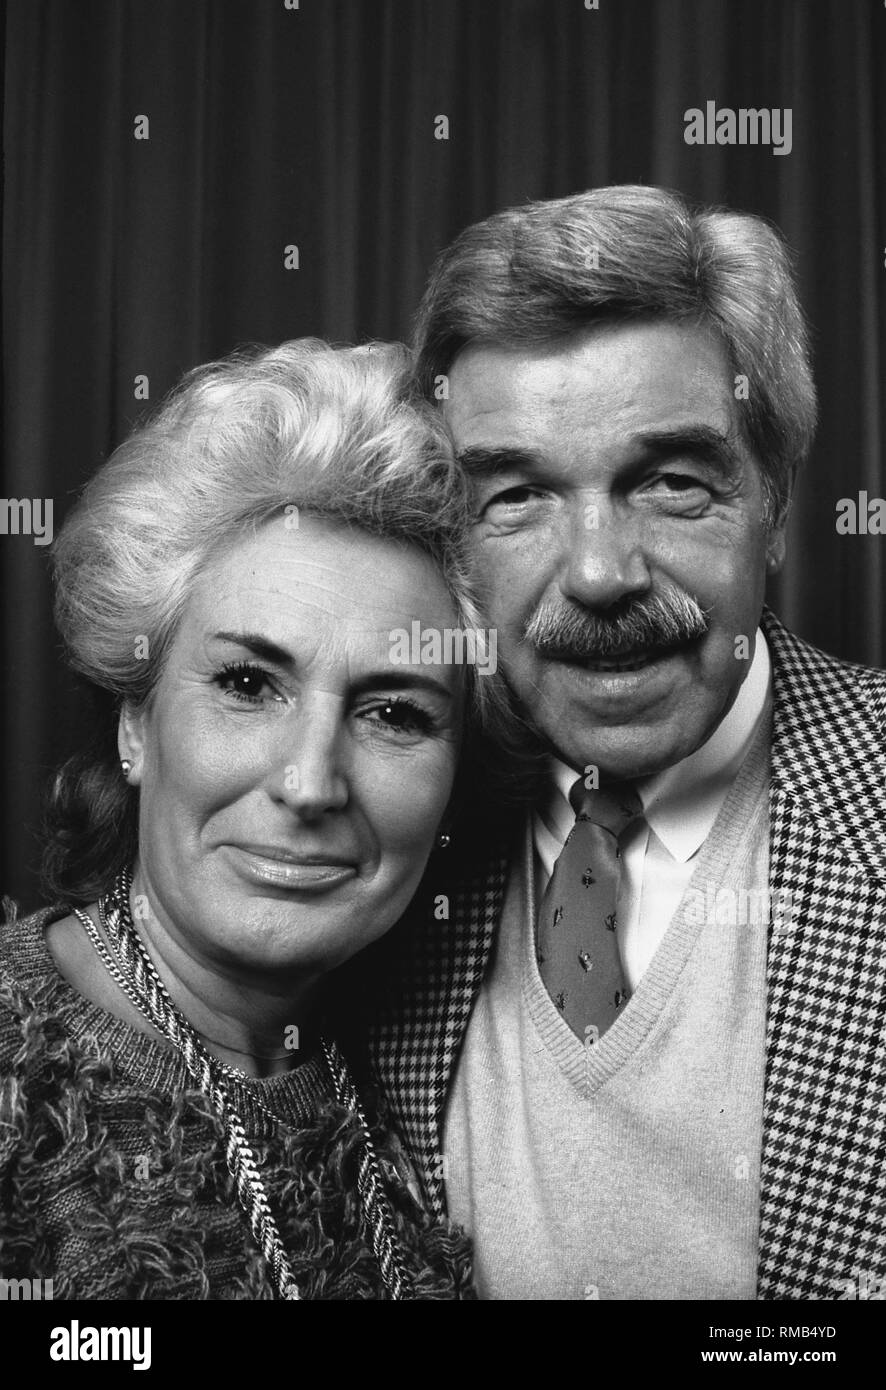 The German actor and director Heinz Dragon (photo with wife Rosemarie) would be 80 years old on February 9, 2003. Stock Photo